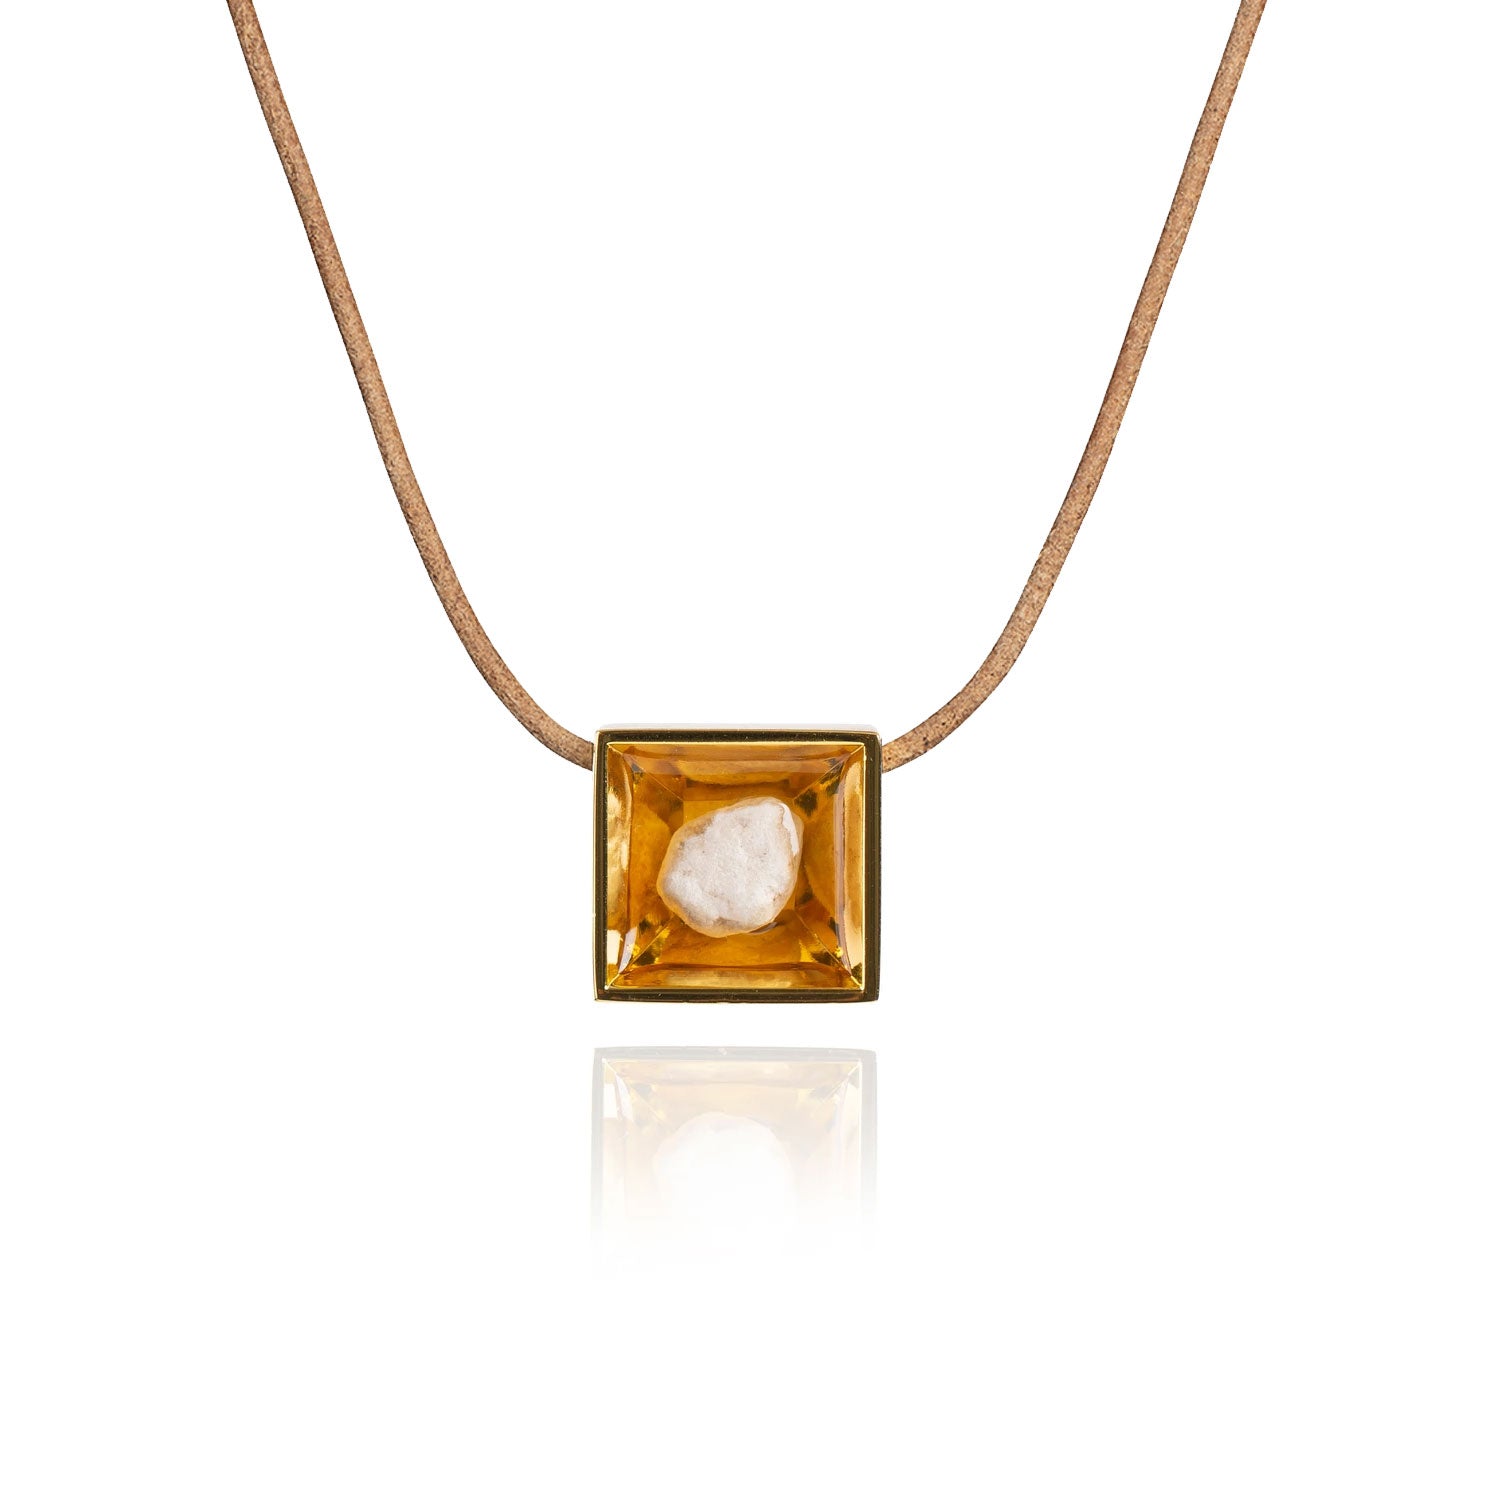 A small natural tan stone sitting in the middle of a square shaped metal pendant in a gold color. The pendant is hanging on a tan leather necklace.